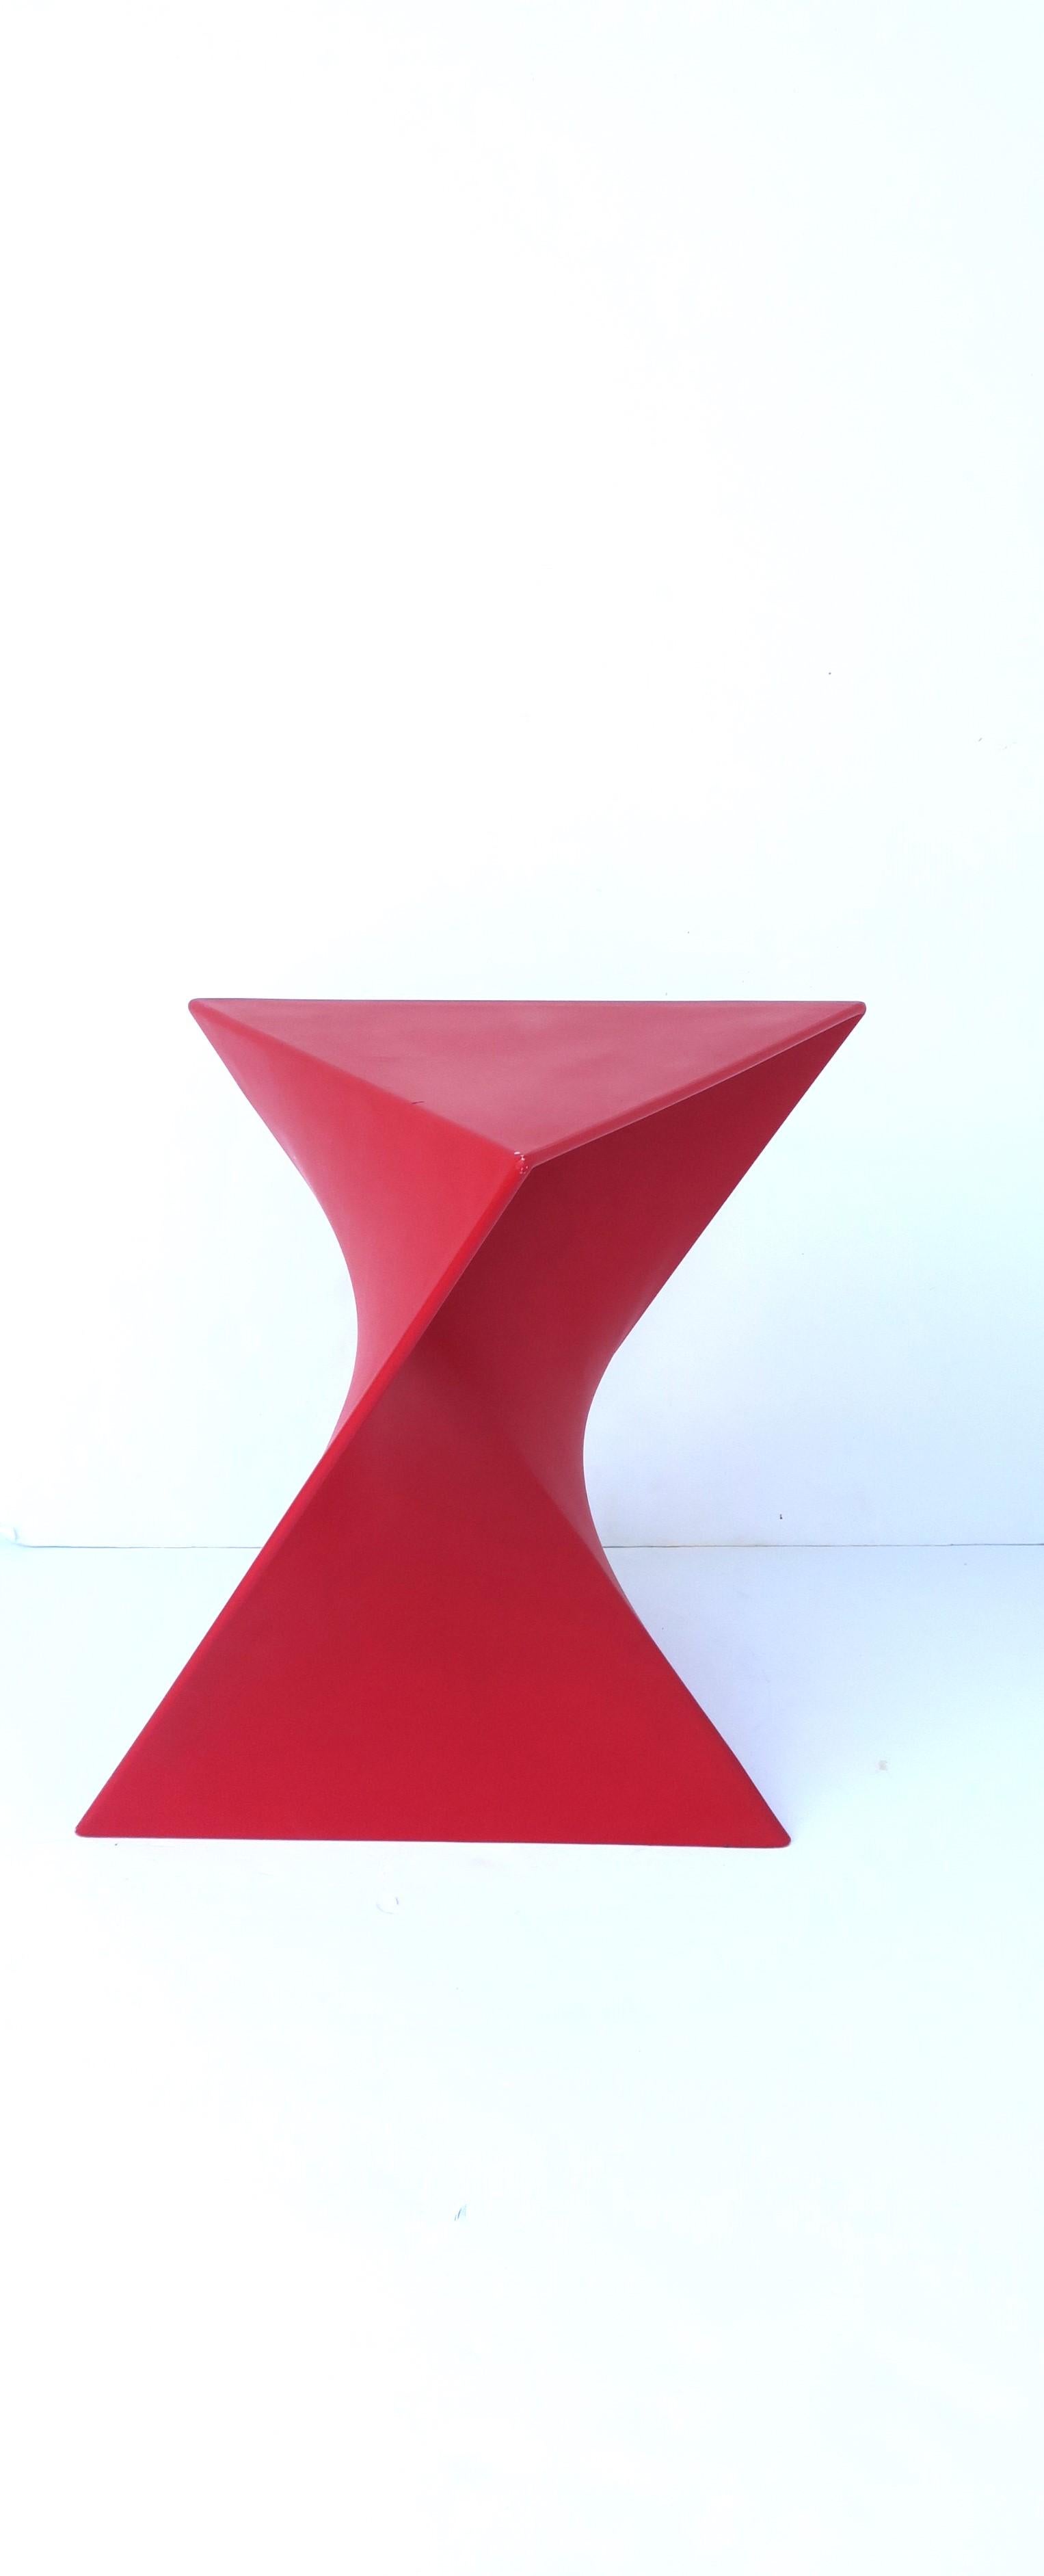 A red geometric side/drinks table, Postmodern period, circa late-20th century. A chic red resin geometric side drinks table. Hue is a 'Coca-Cola' red. A great statement piece for a living room, lounge/sitting area, etc. Piece is a convenient size.